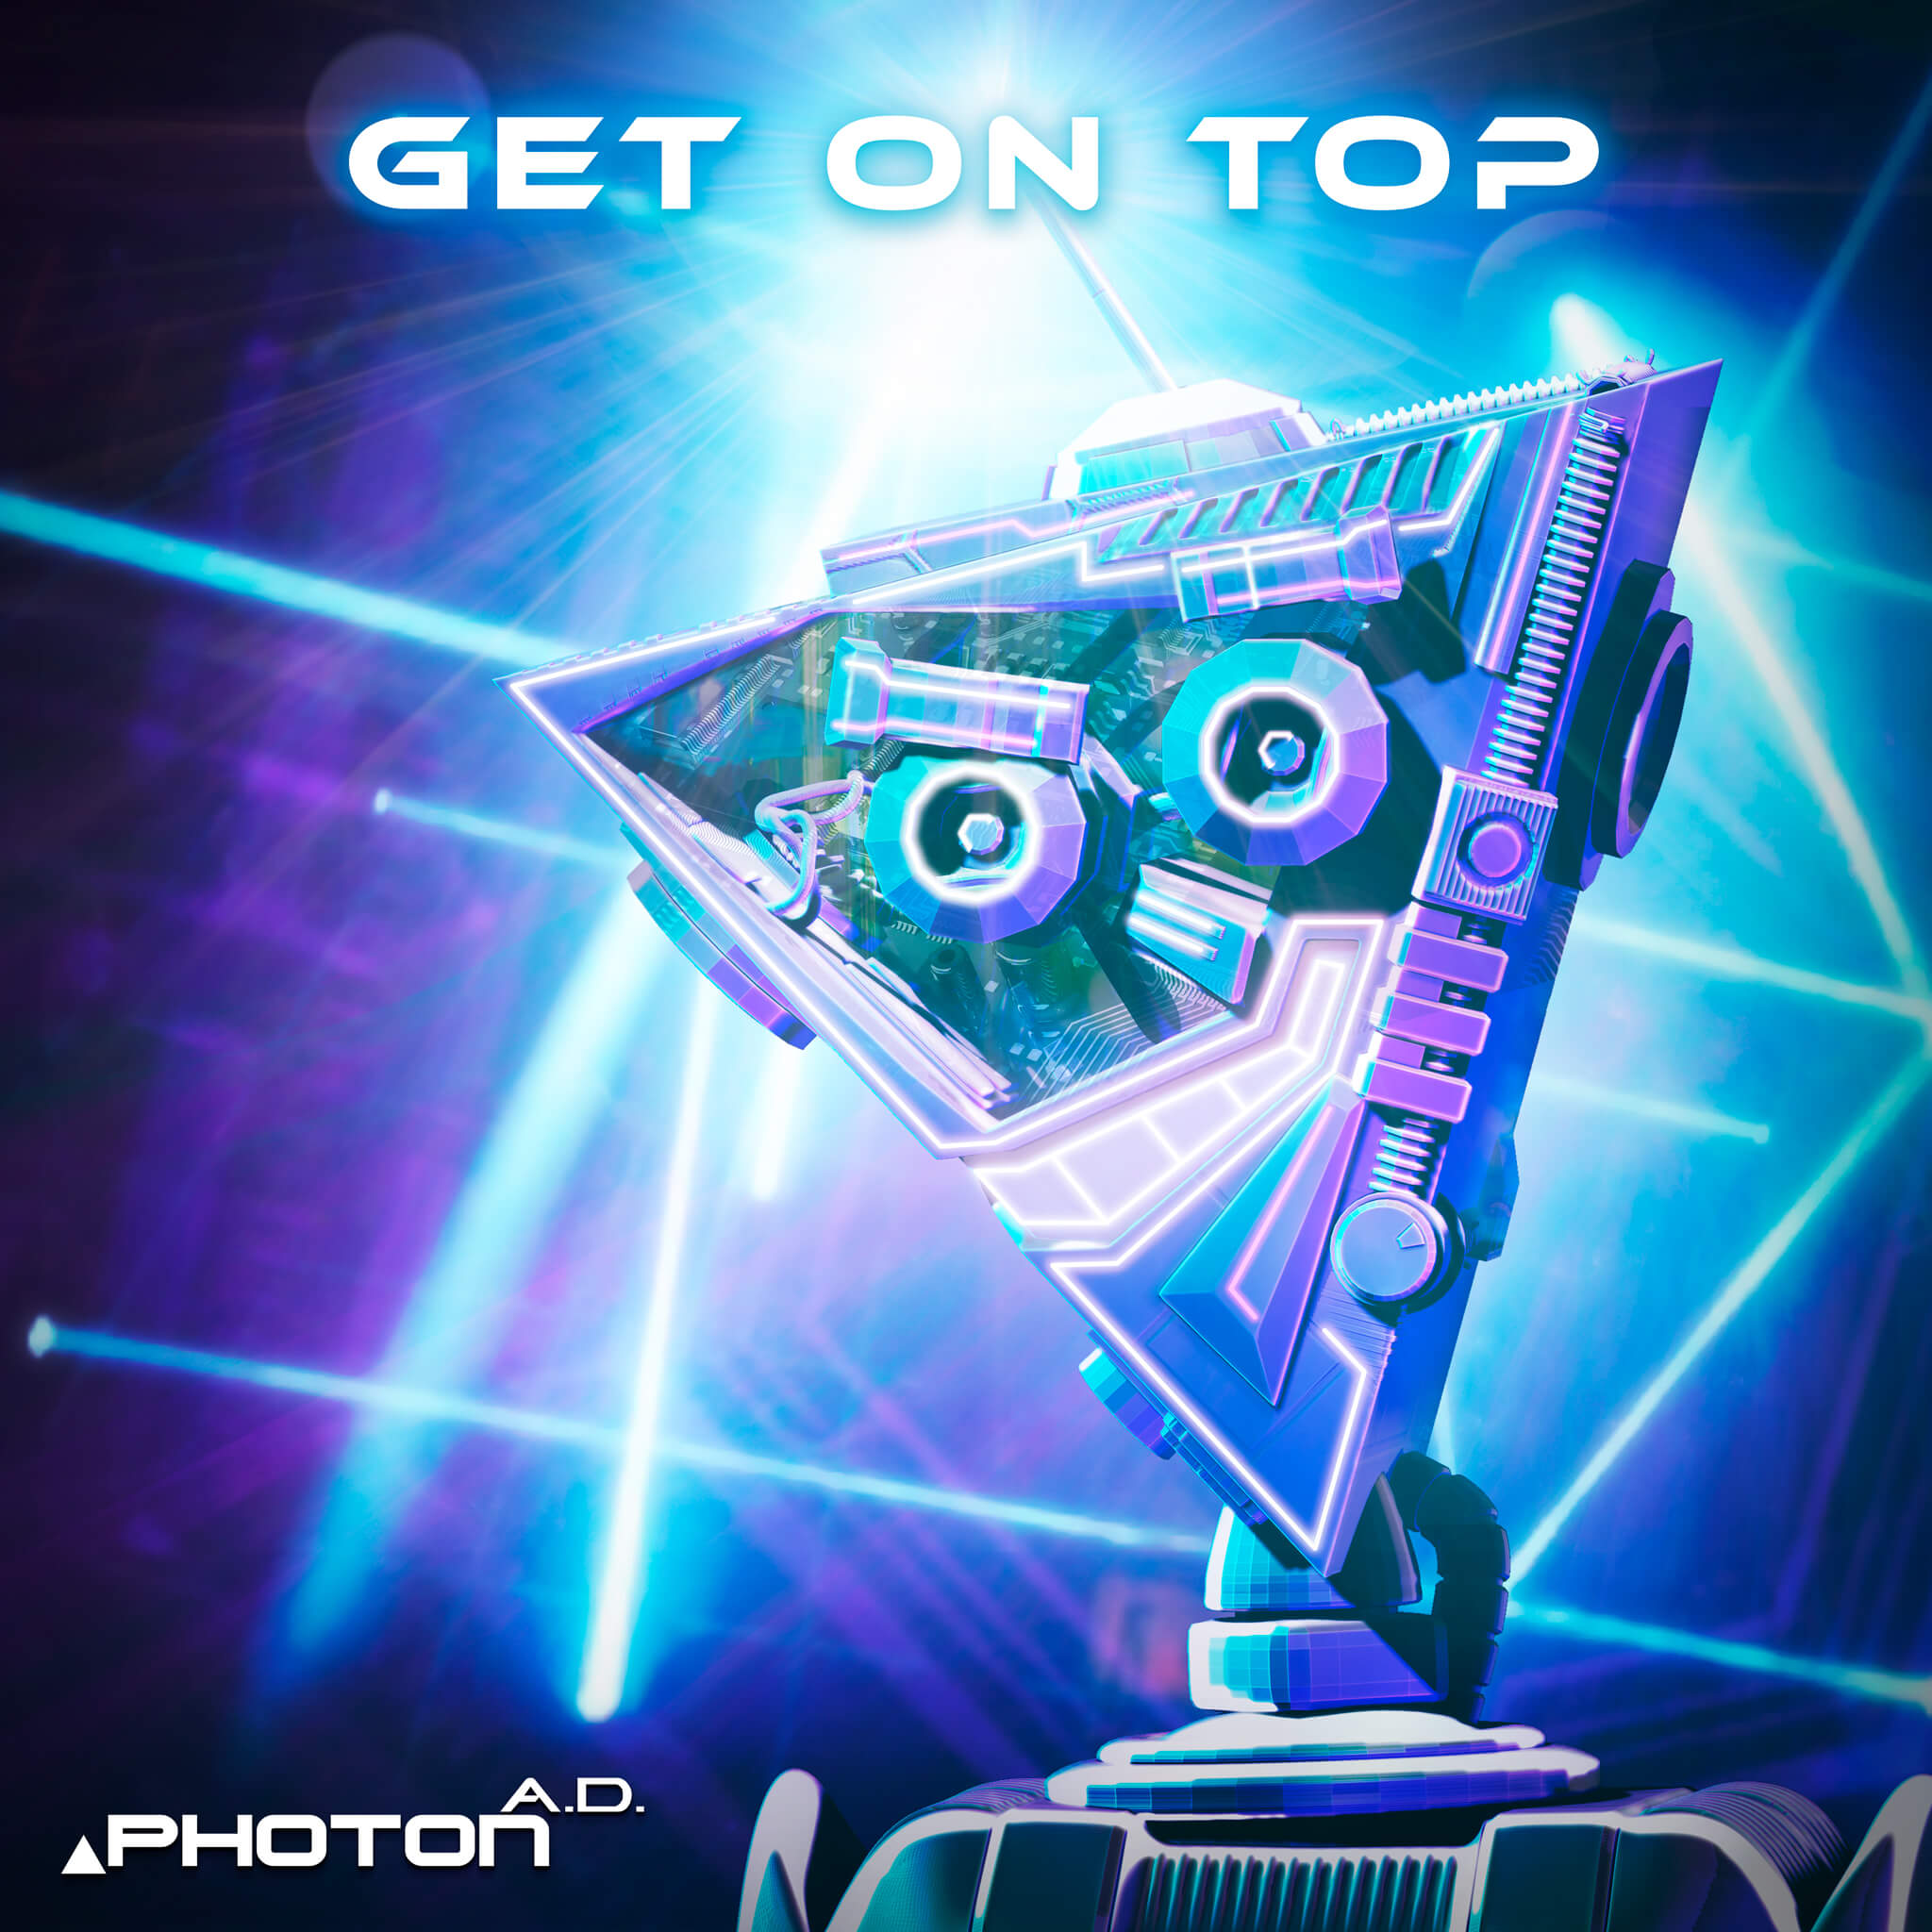 Get On Top - Cover Art by Axon Genesis